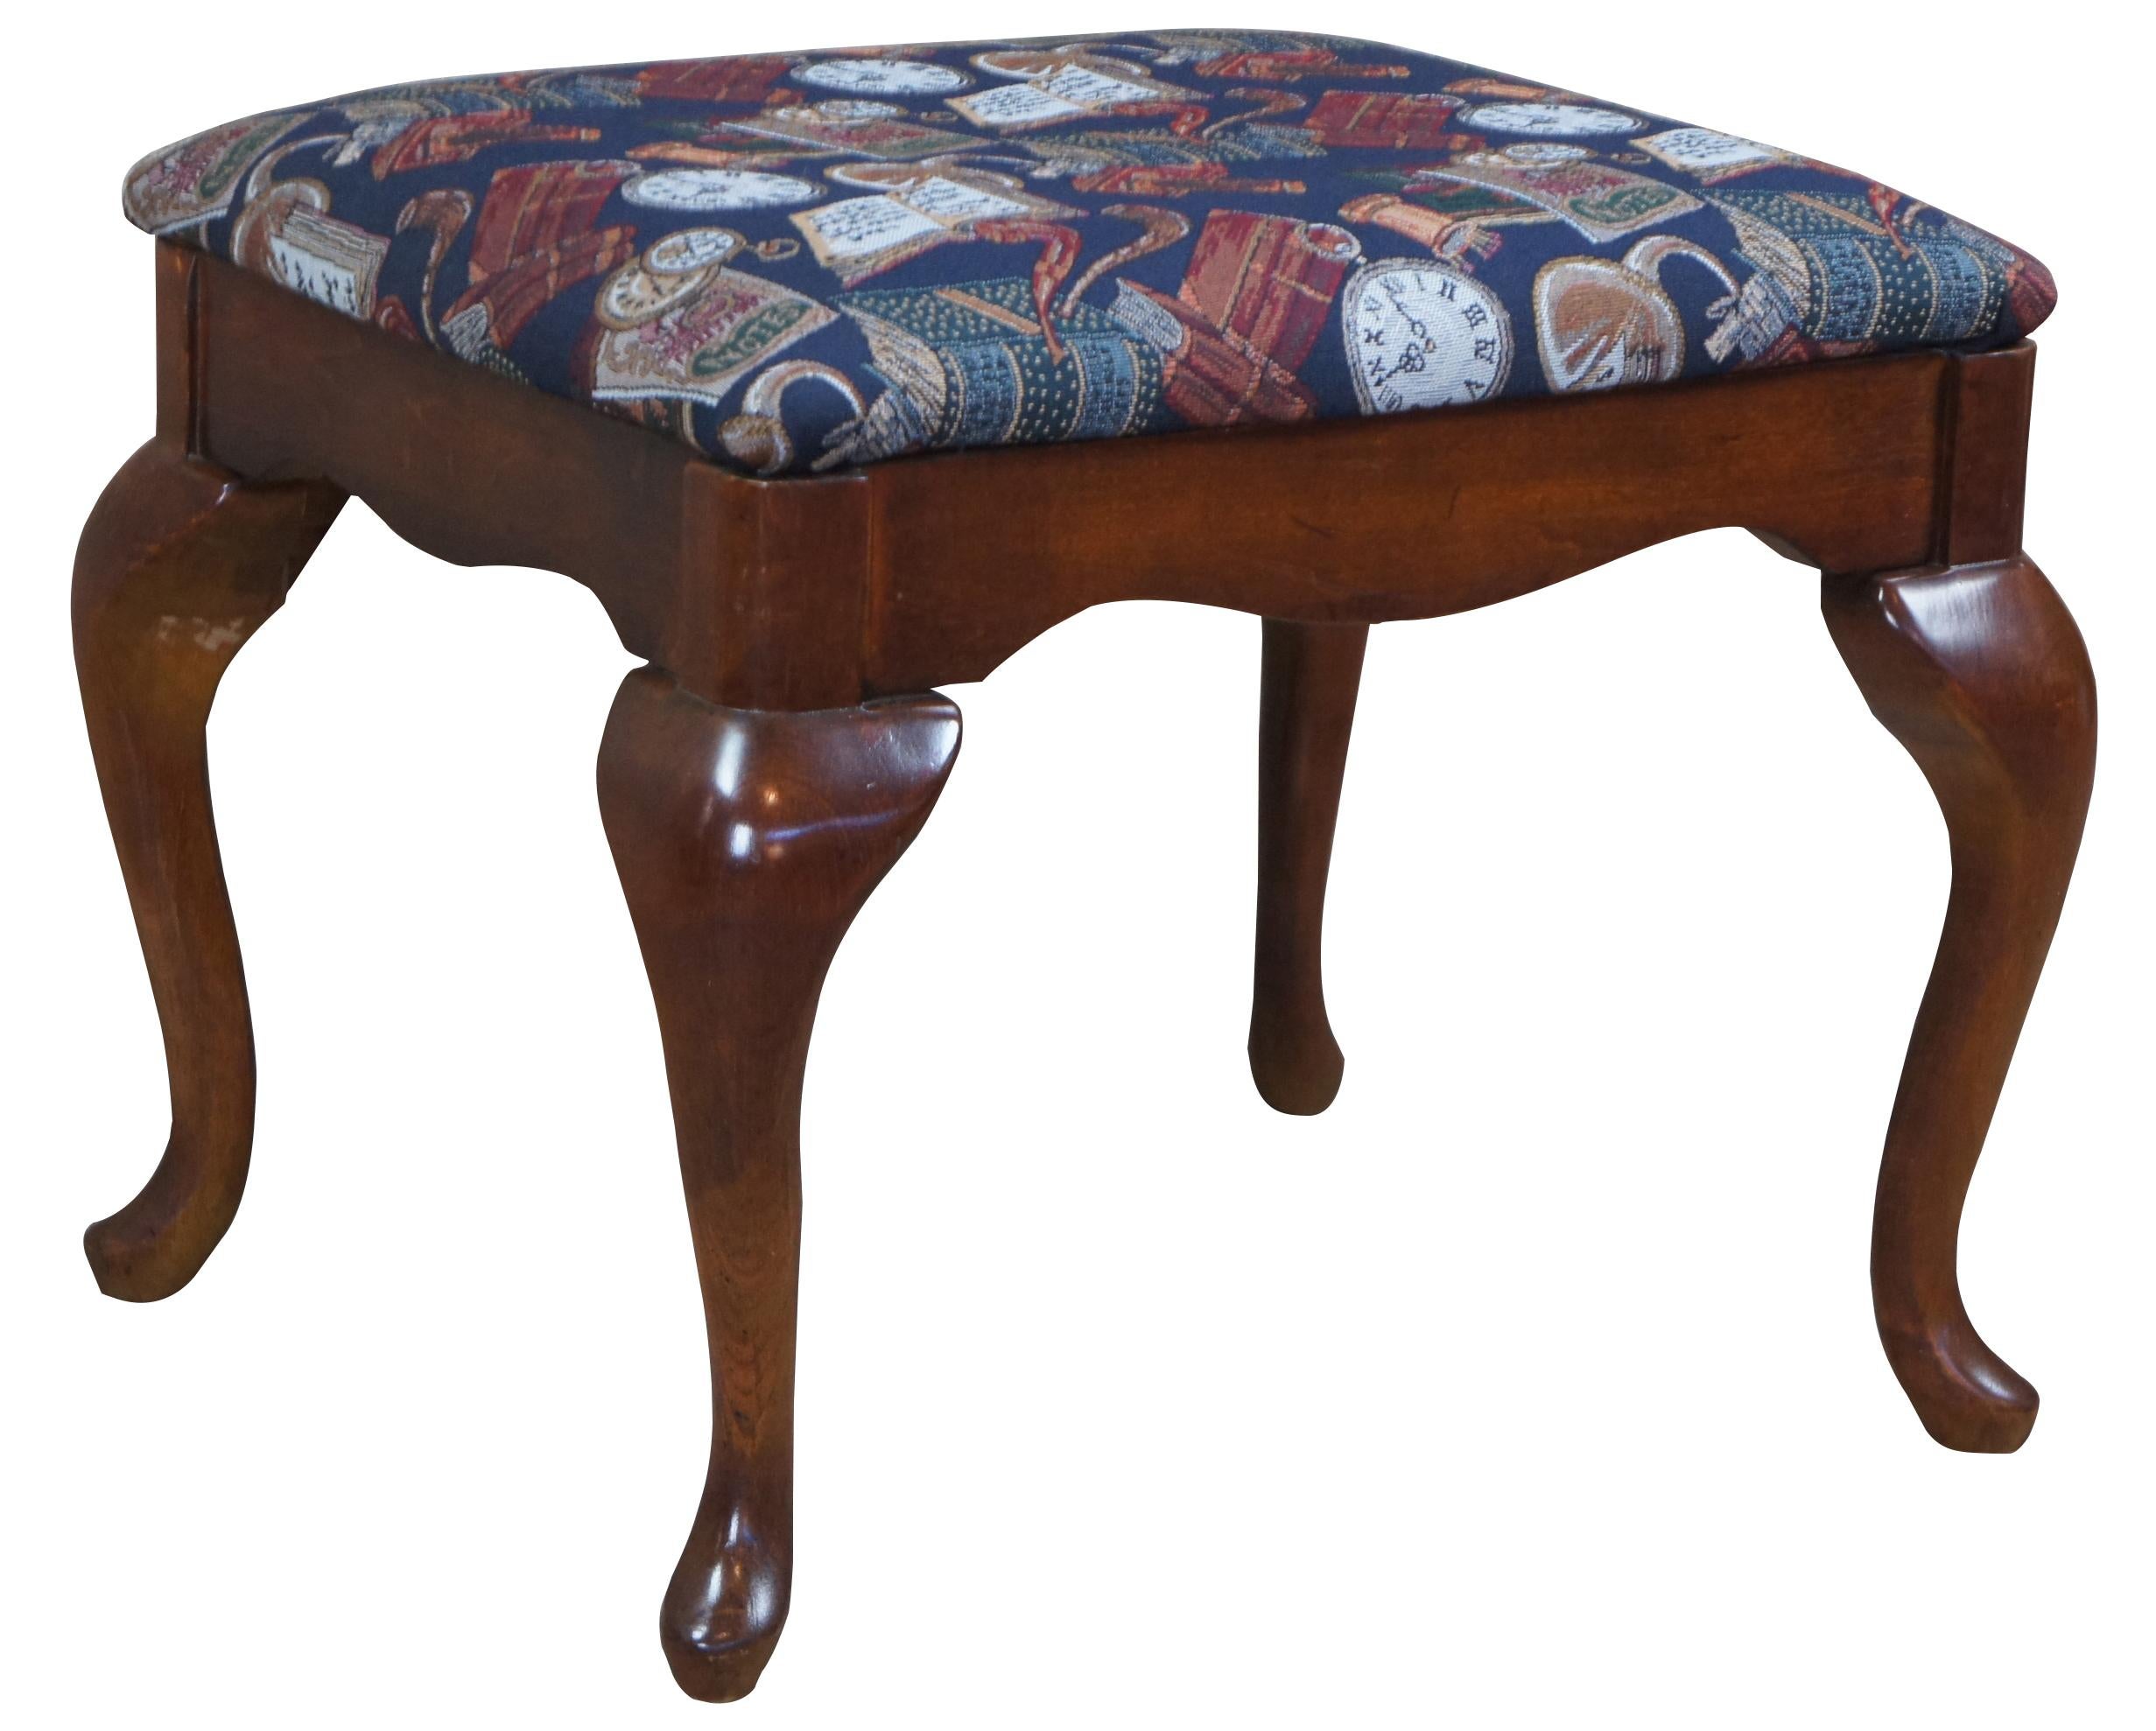 American drew stool, circa 1980s. Made from cherry in Queen Anne styling with cabriole legs leading to pad feet. Includes a serpentine cut apron and blue upholstery library theme with clocks, books, pipes and music.
  